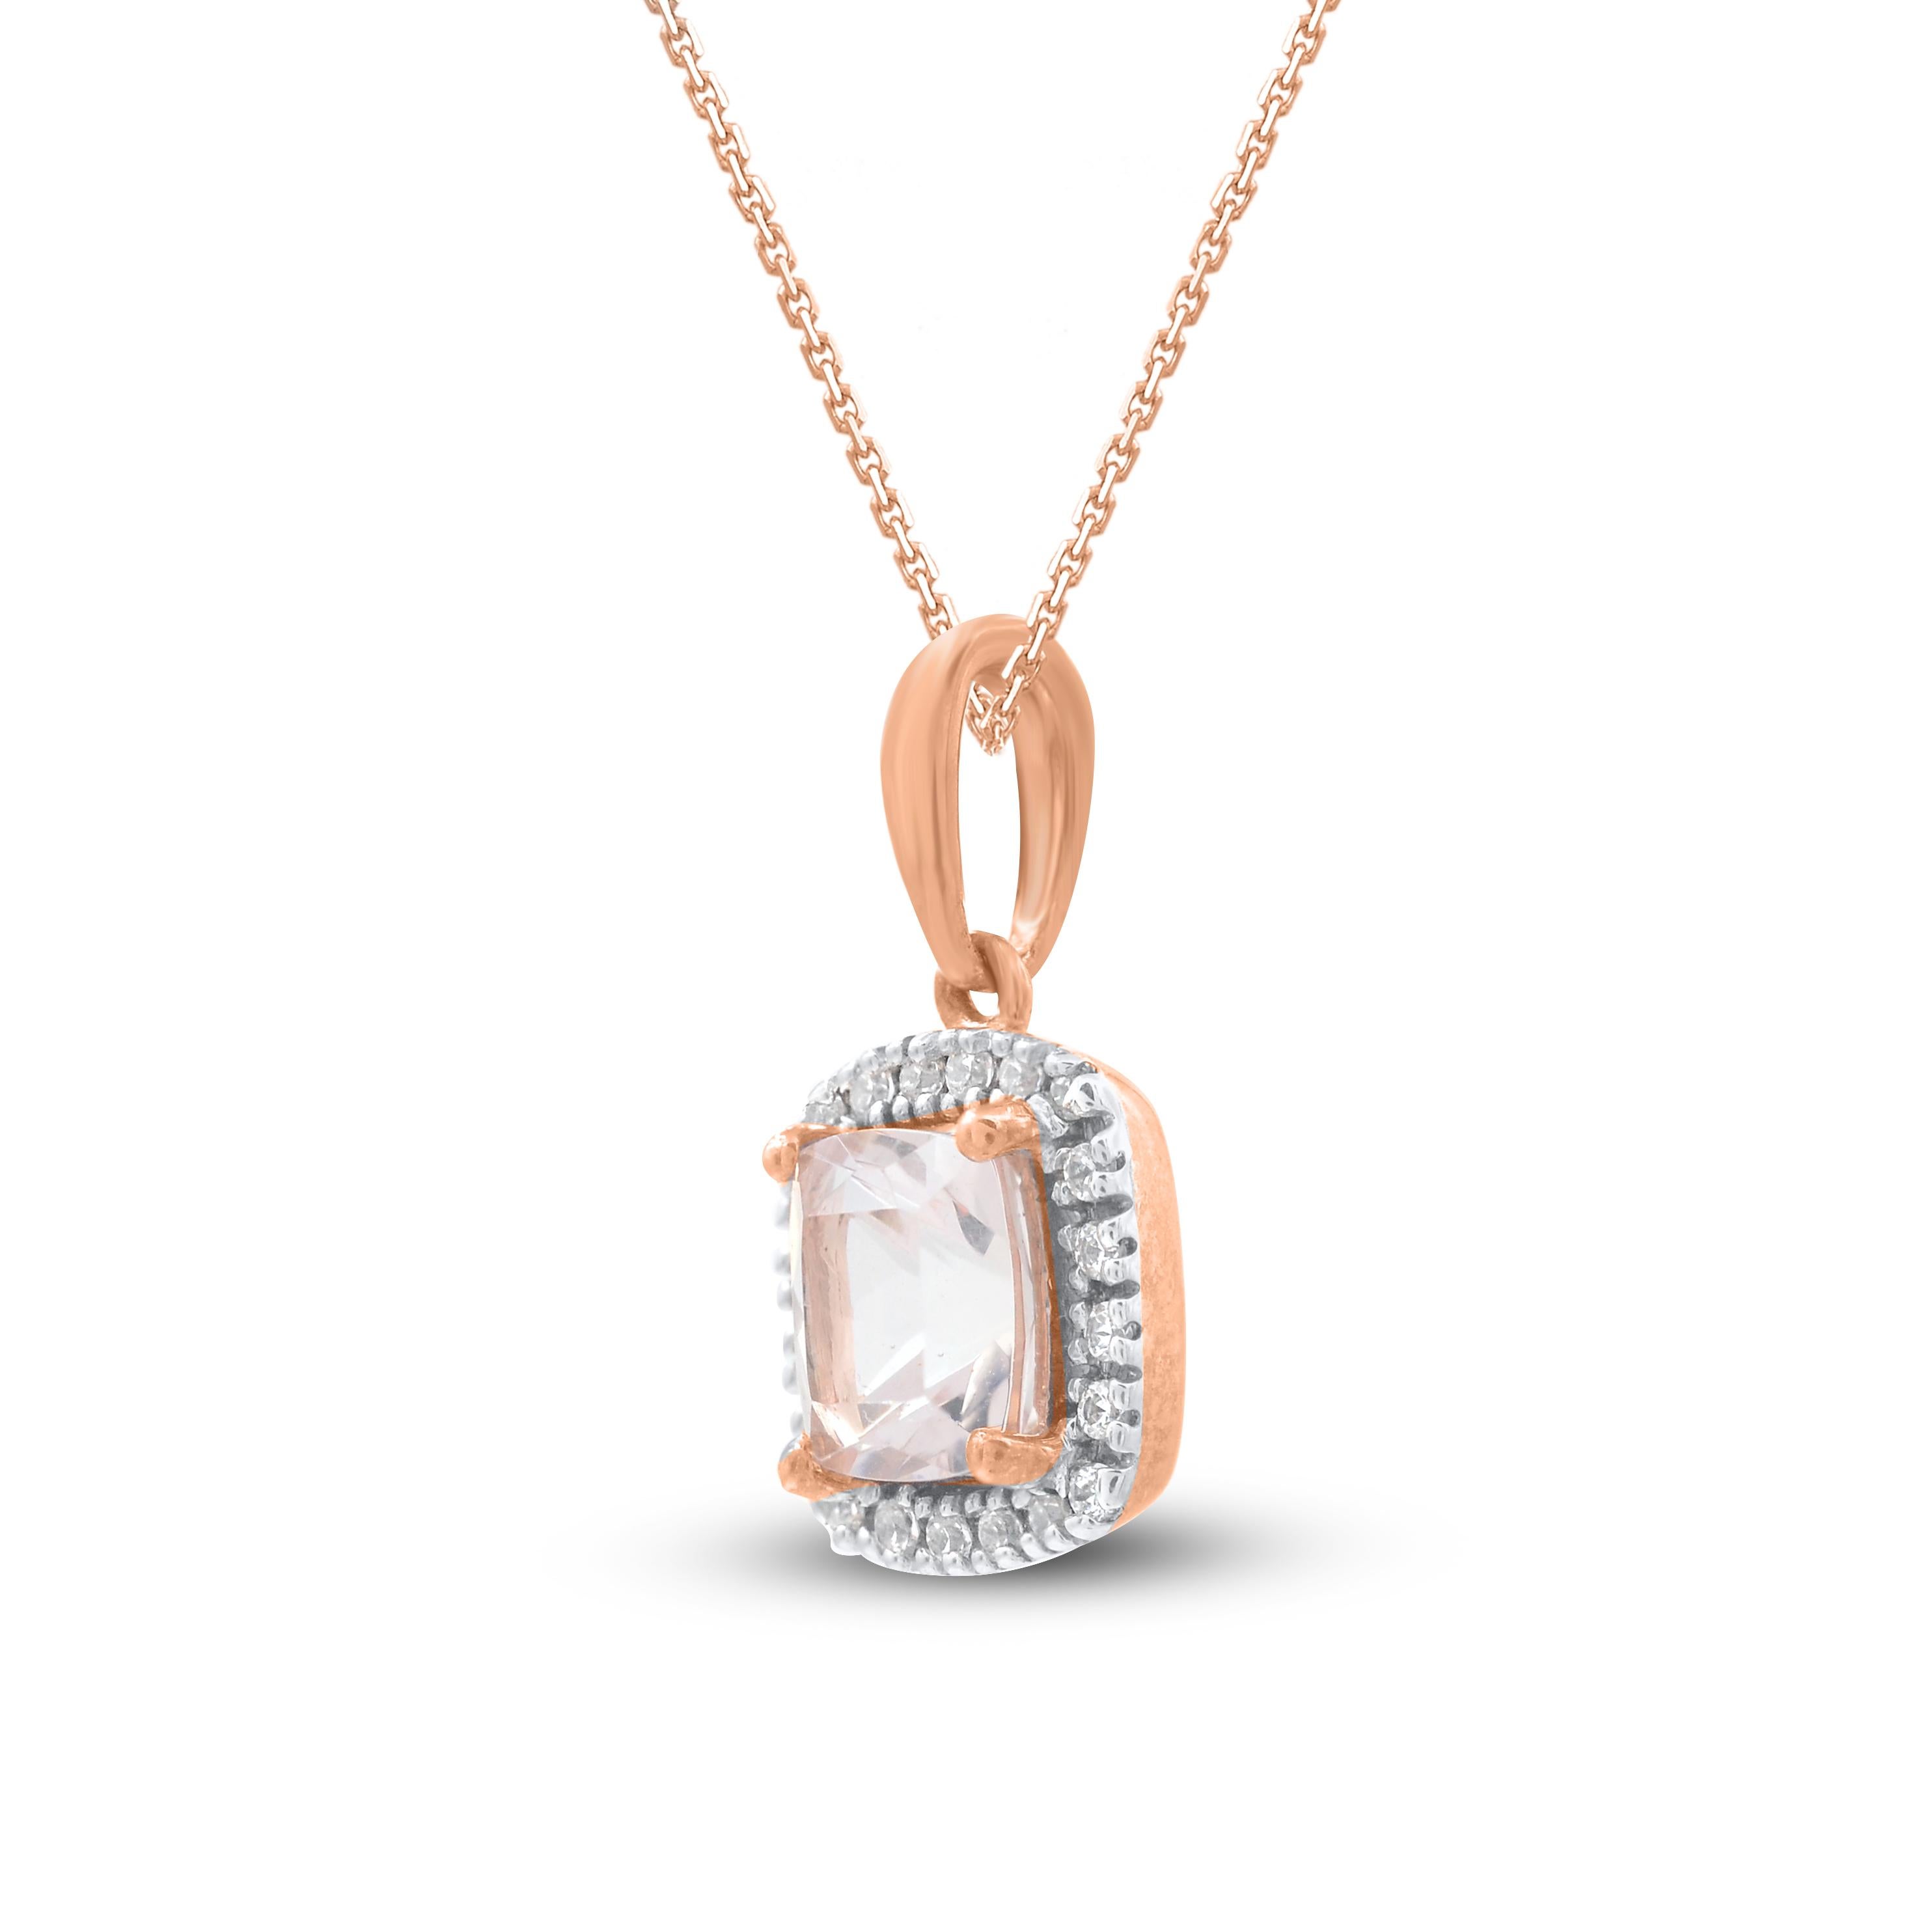 This beautiful halo pendant necklace is studded with 20 single cut natural diamonds and 1 cushion shape morganite in prong setting. The total diamond weight of these diamond pendant is 1.35 carats. All the diamonds are H-I color, I-2 clarity. This